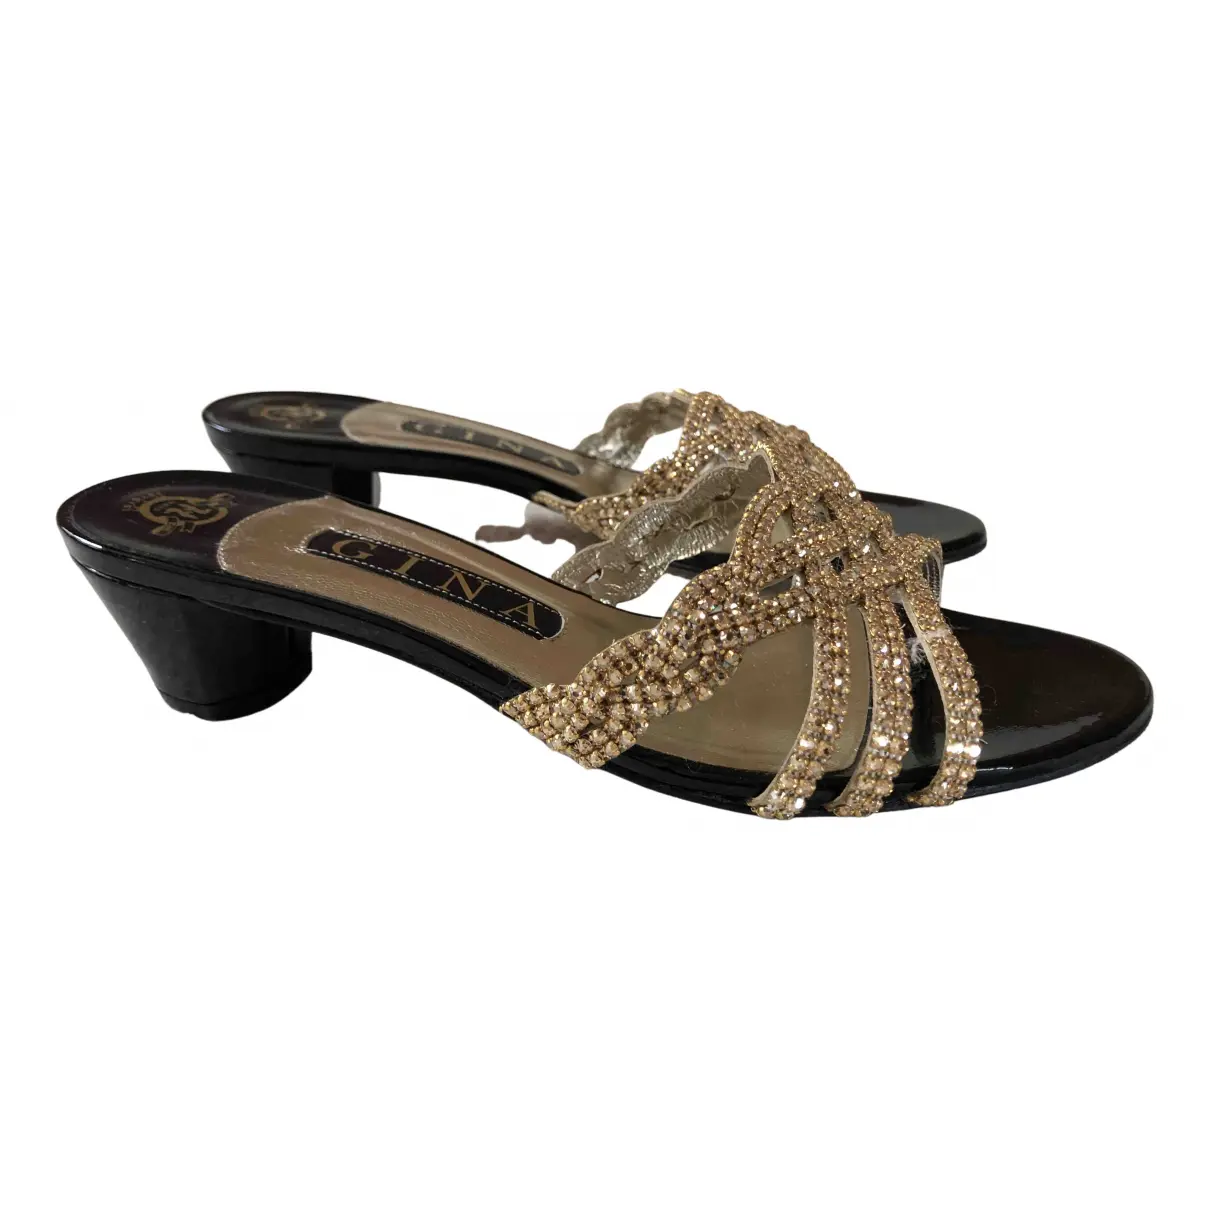 Leather sandals Gina